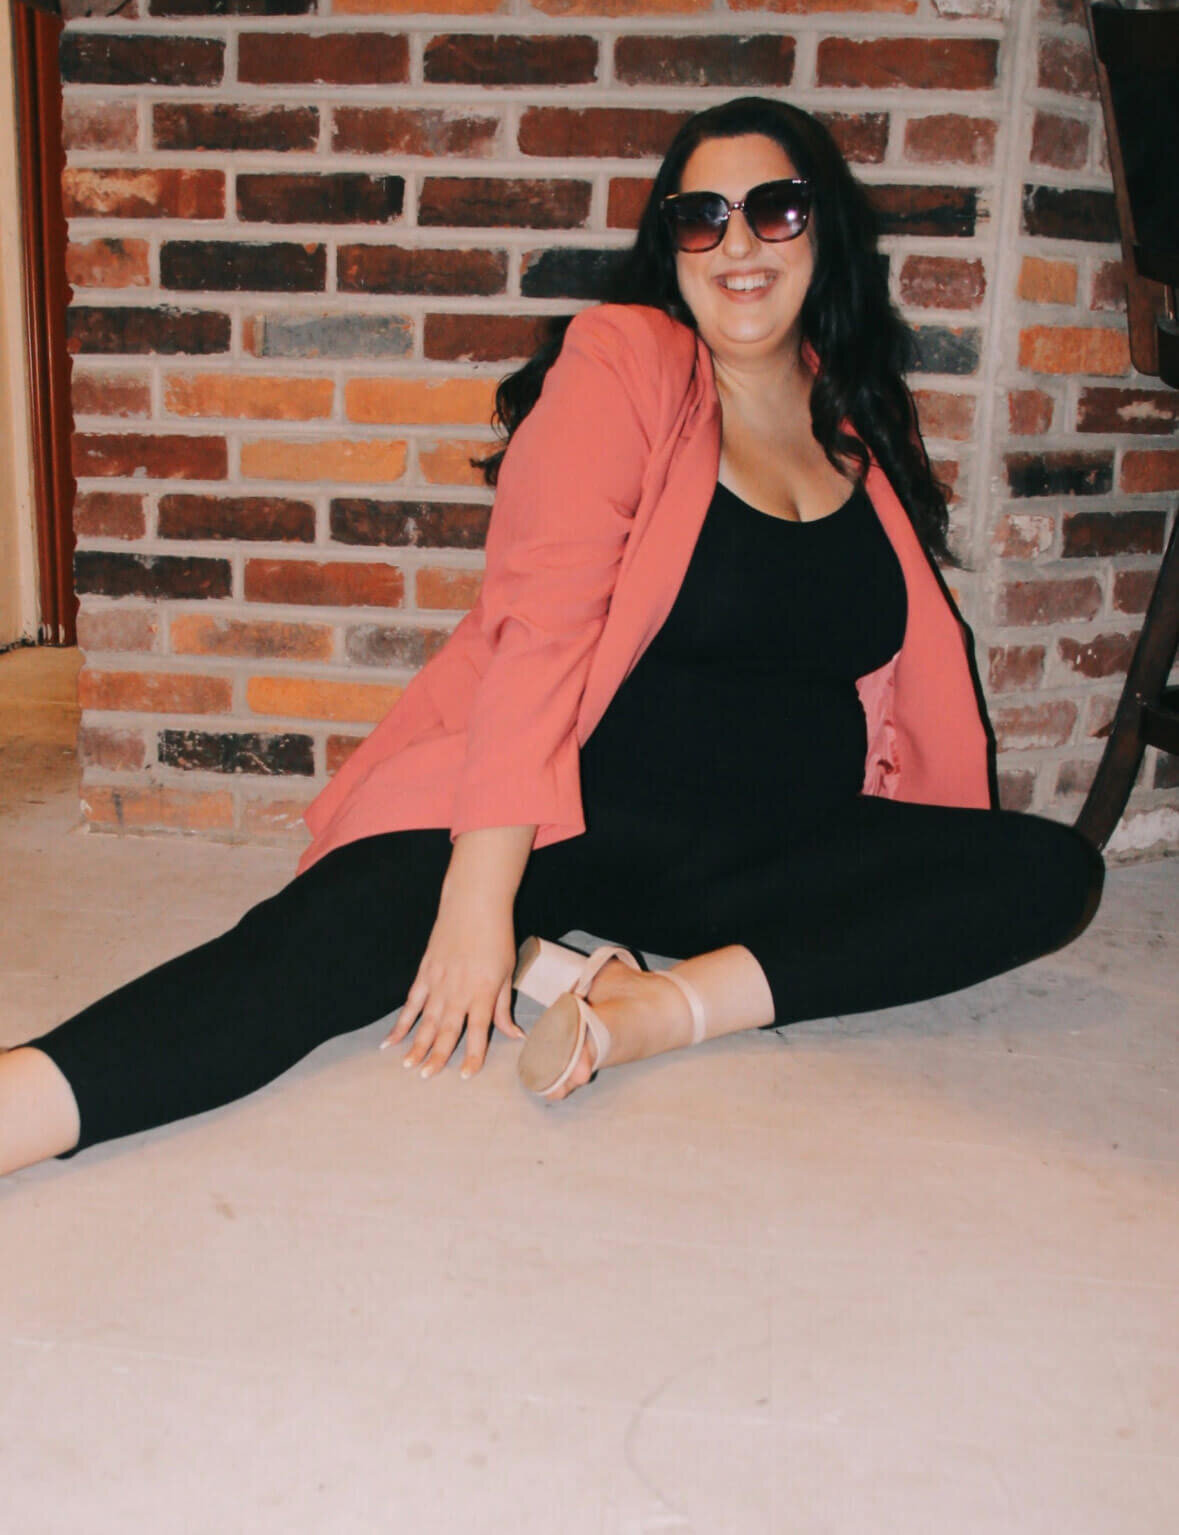 Sarah Weiss sitting against a brick wall, wearing a pink blazer and sunglasses